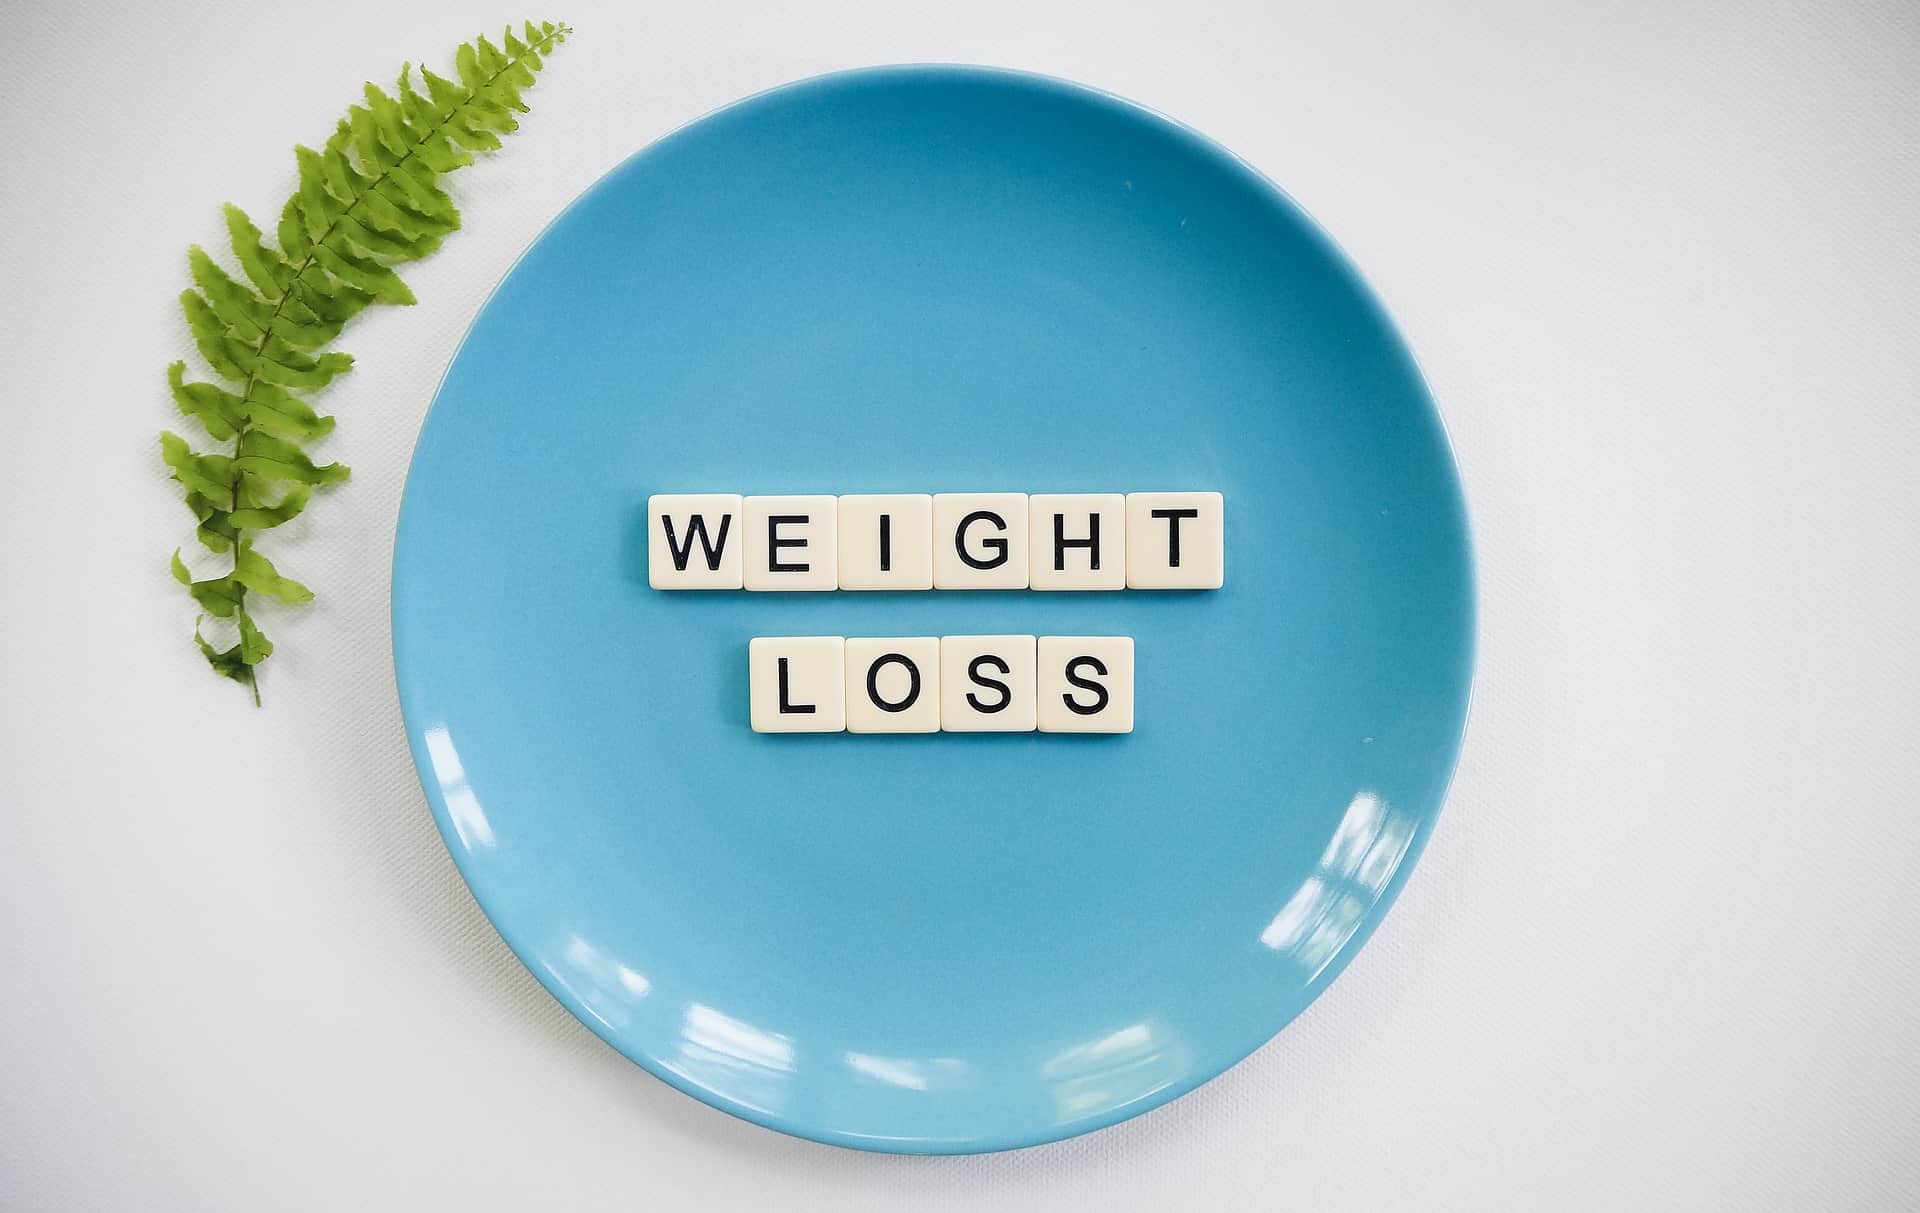 Blue Plate With Weight Loss in Spelled in Tiles